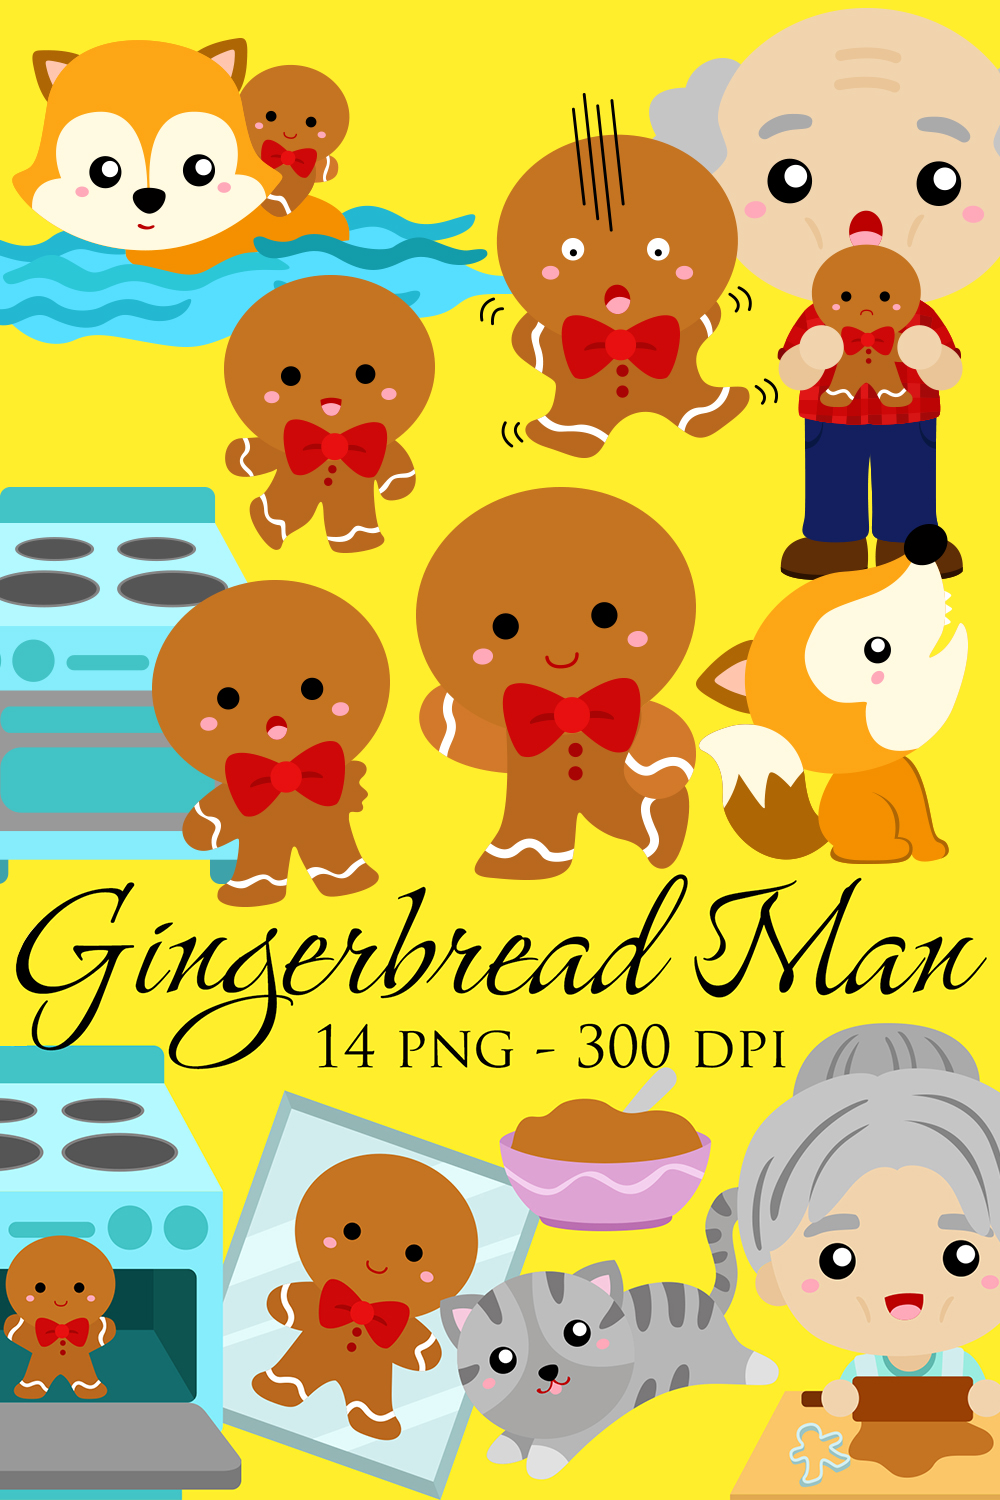 Cute Gingerbread Cookies with Man and Animals Illustration Vector Clipart Cartoon pinterest preview image.